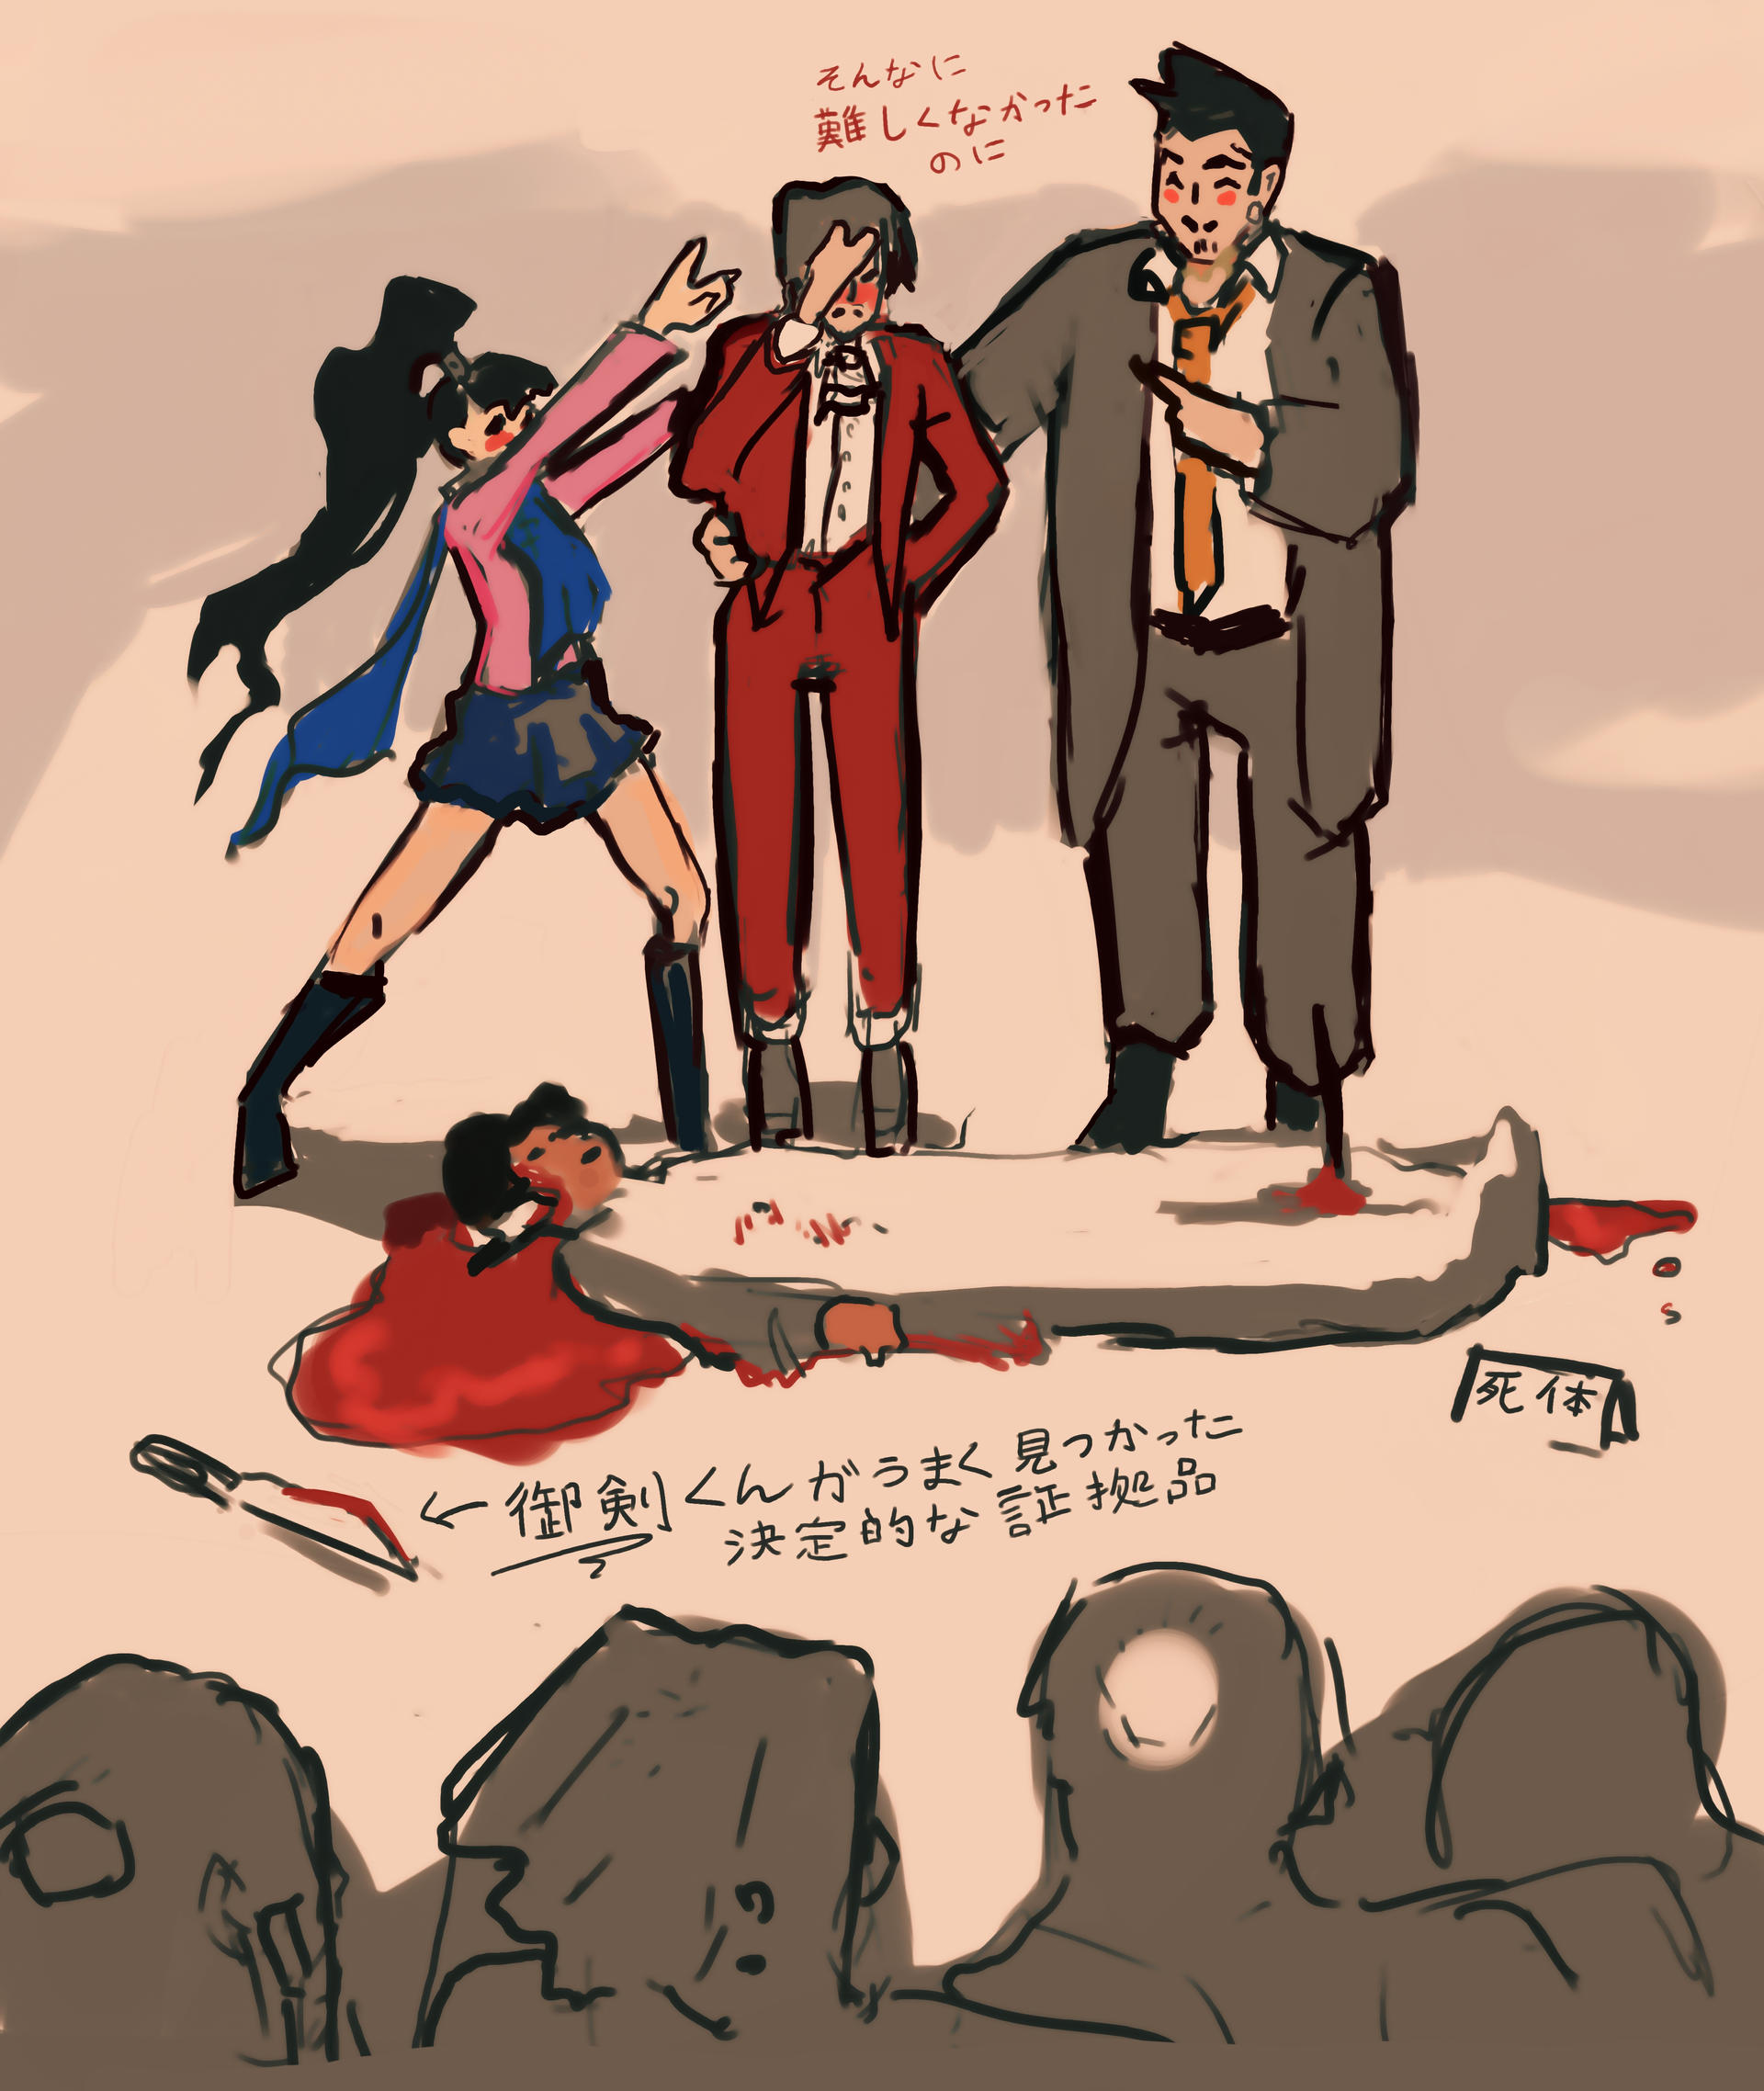 Ace Attorney Investigations